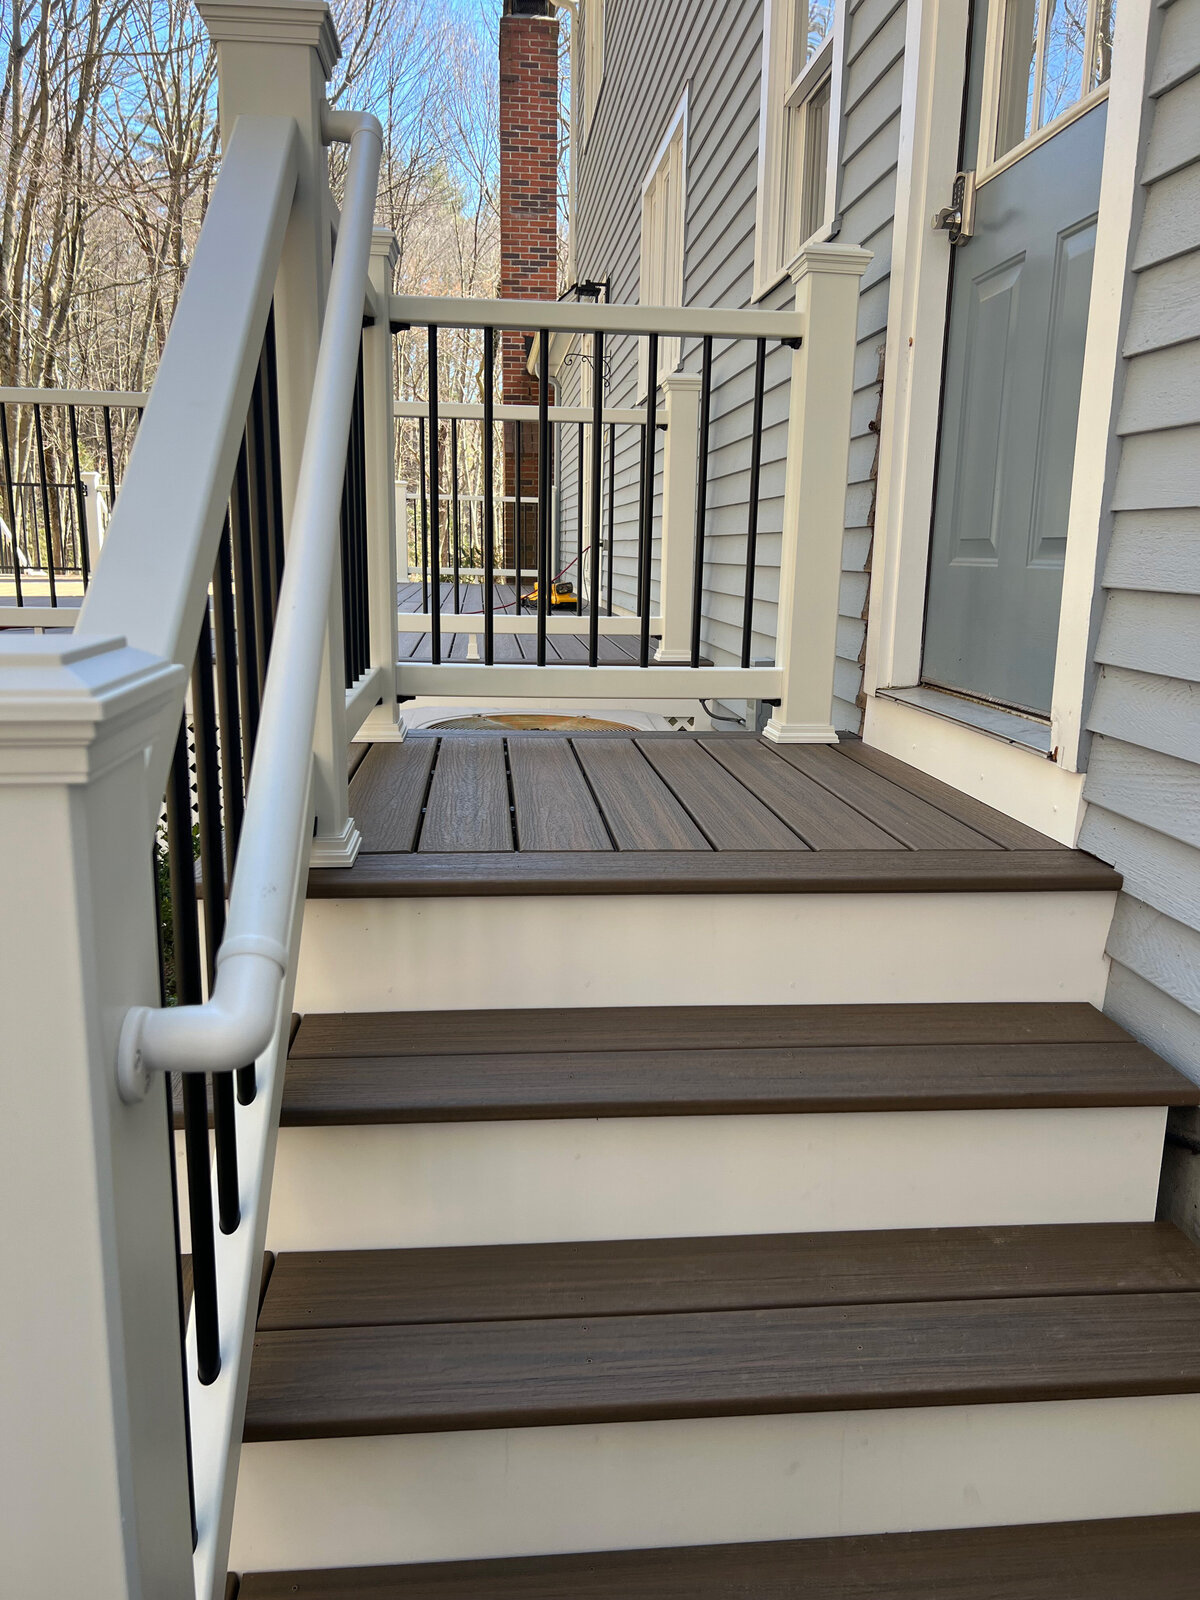 A set of stairs built by a Holden MA Deck Contractor out of dark composite and white PVC railings